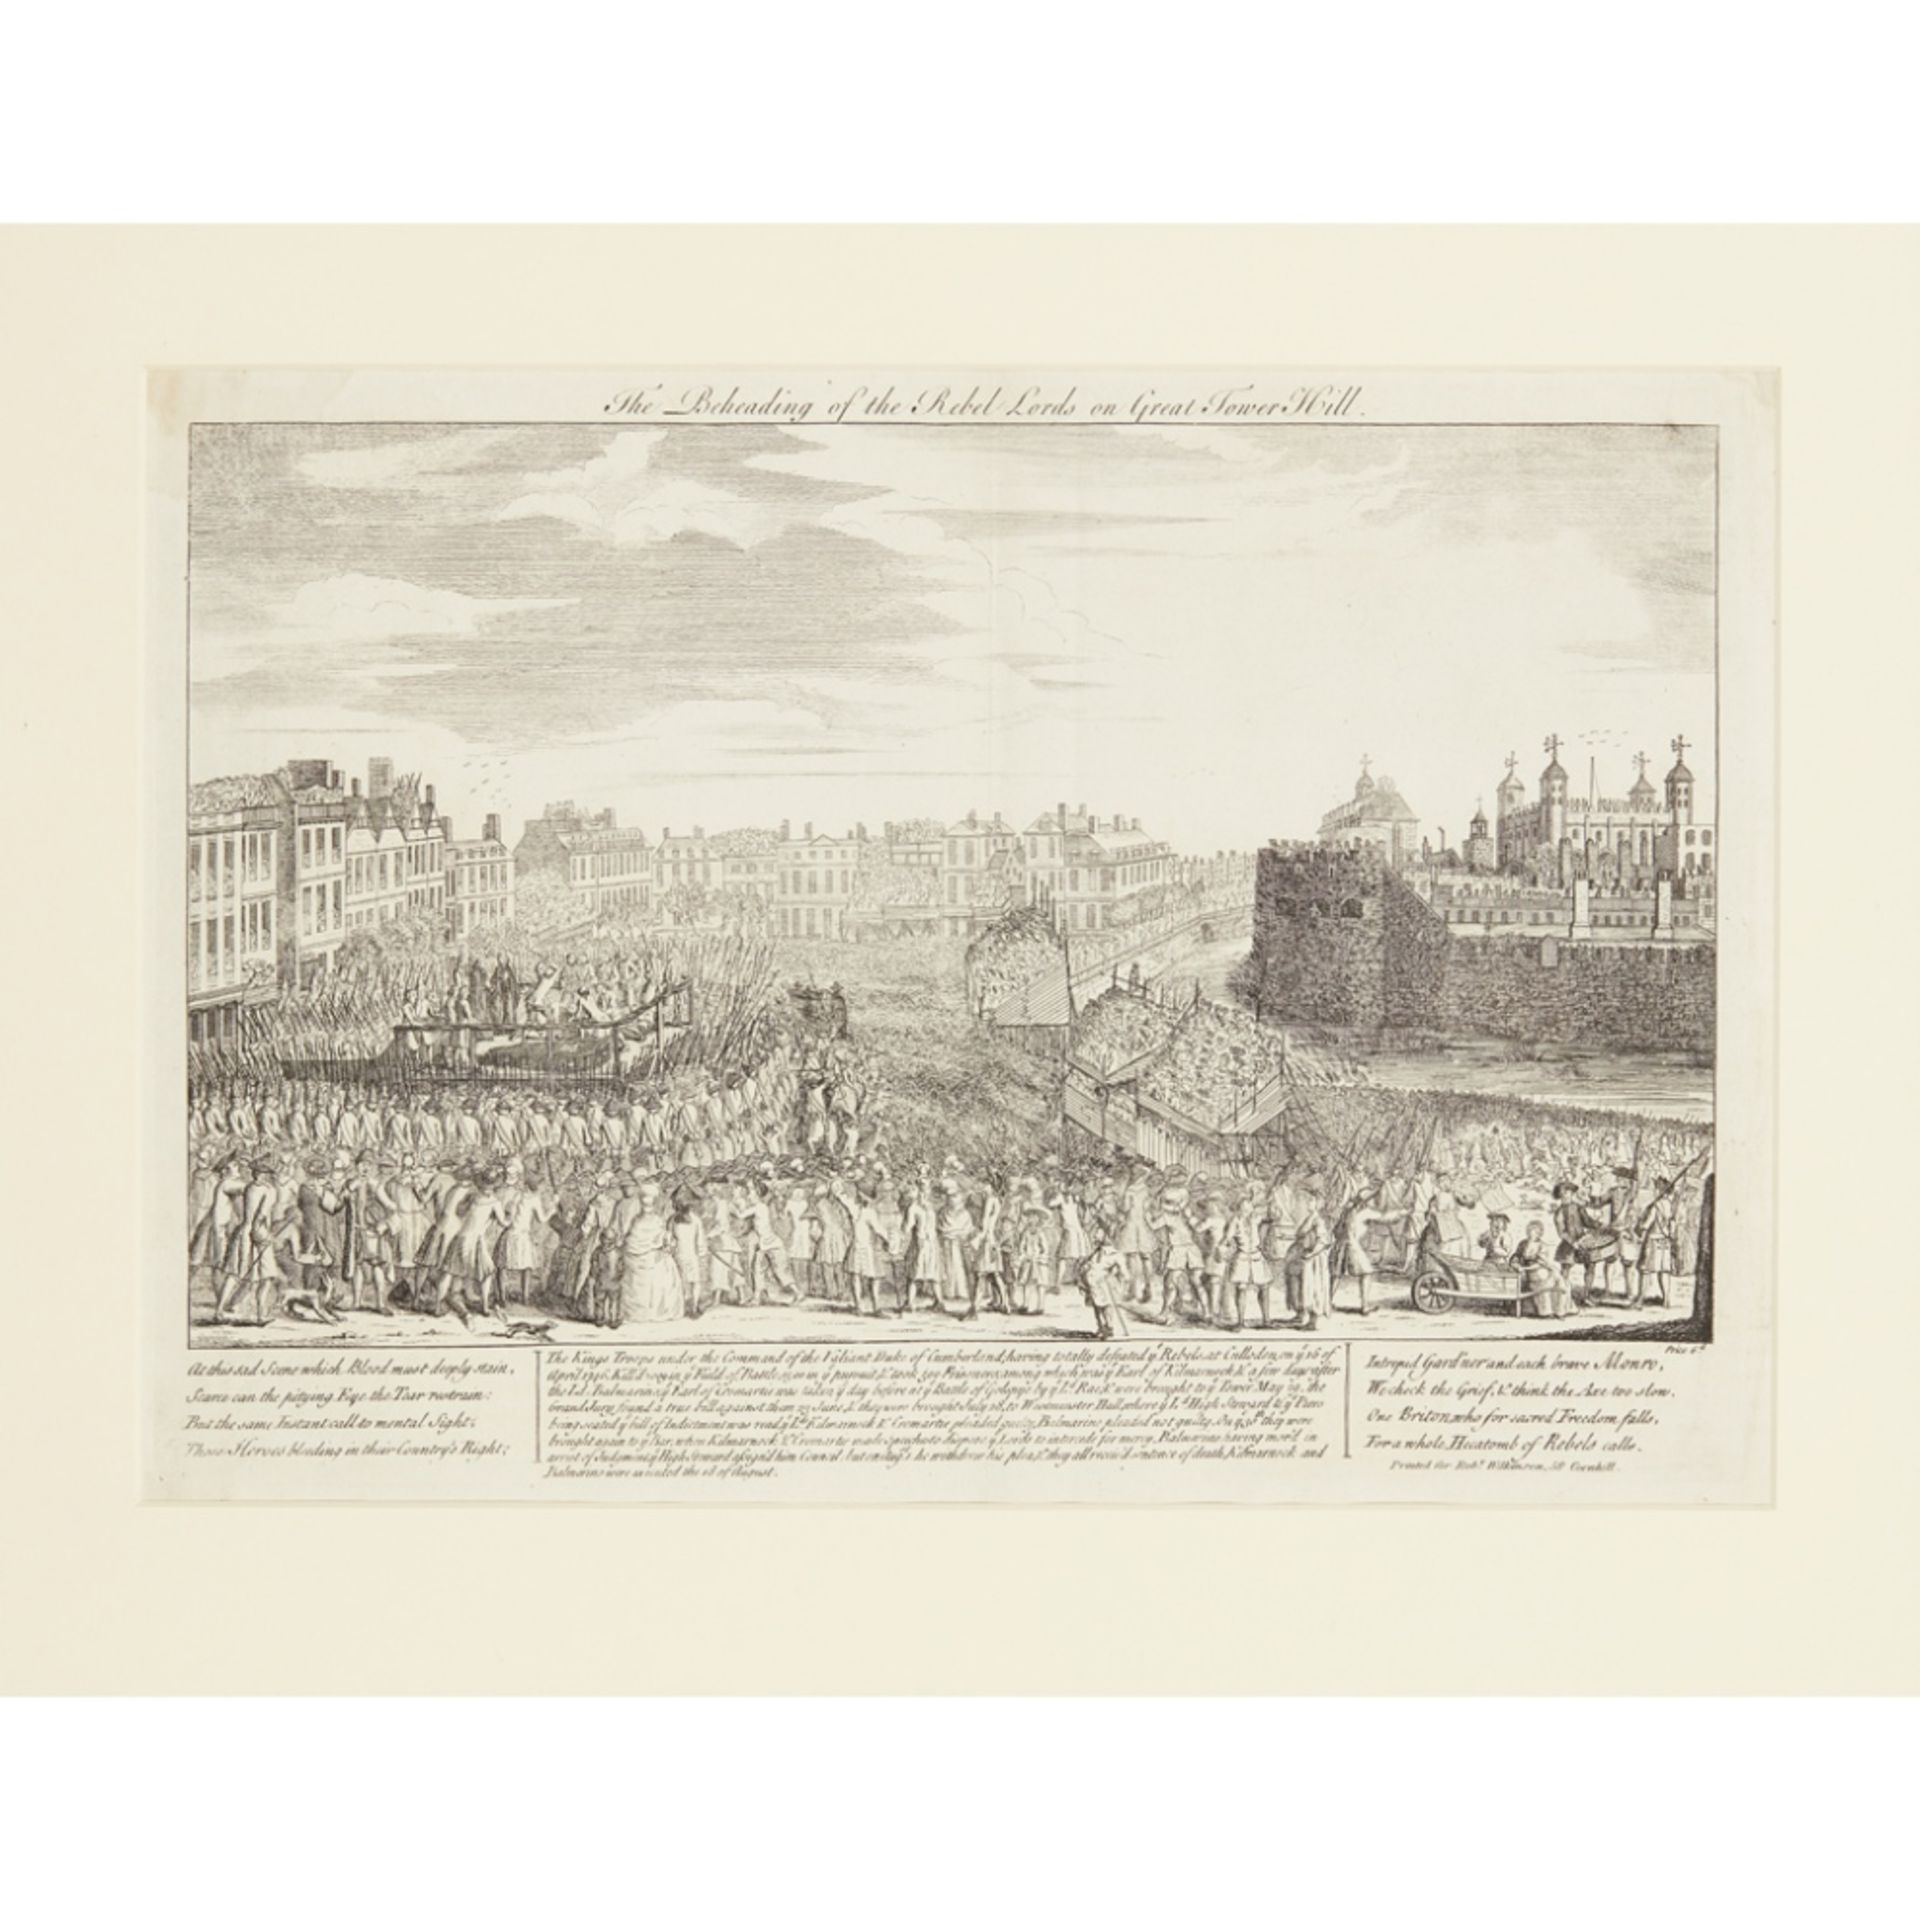 A SELECTION OF 10 JACOBITE PRINTS THE BEHEADING OF THE REBEL LORDS ON GREAT TOWER HILL London: